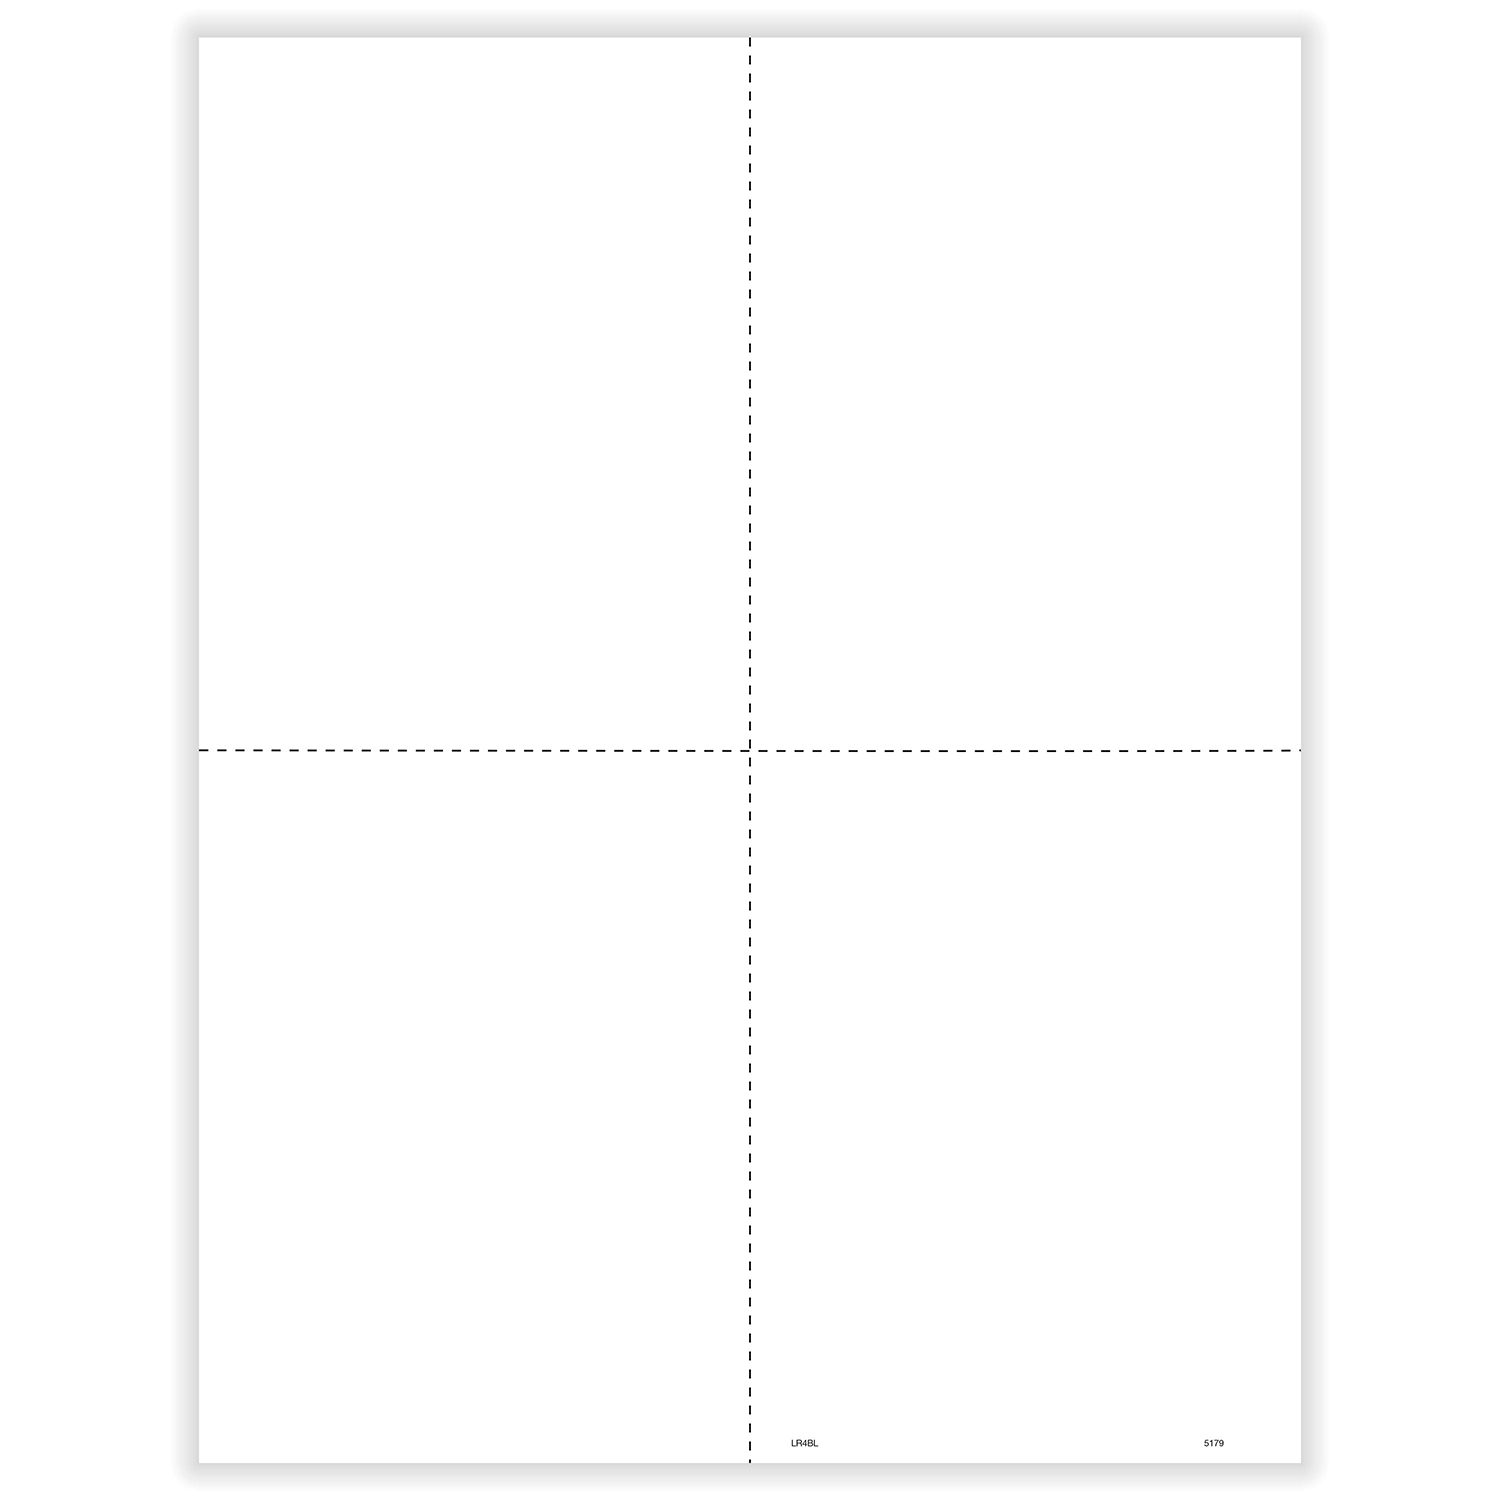 Picture of 1099-R Blank, Copy B & C, 4-Up, w/ Backer (500 Forms)